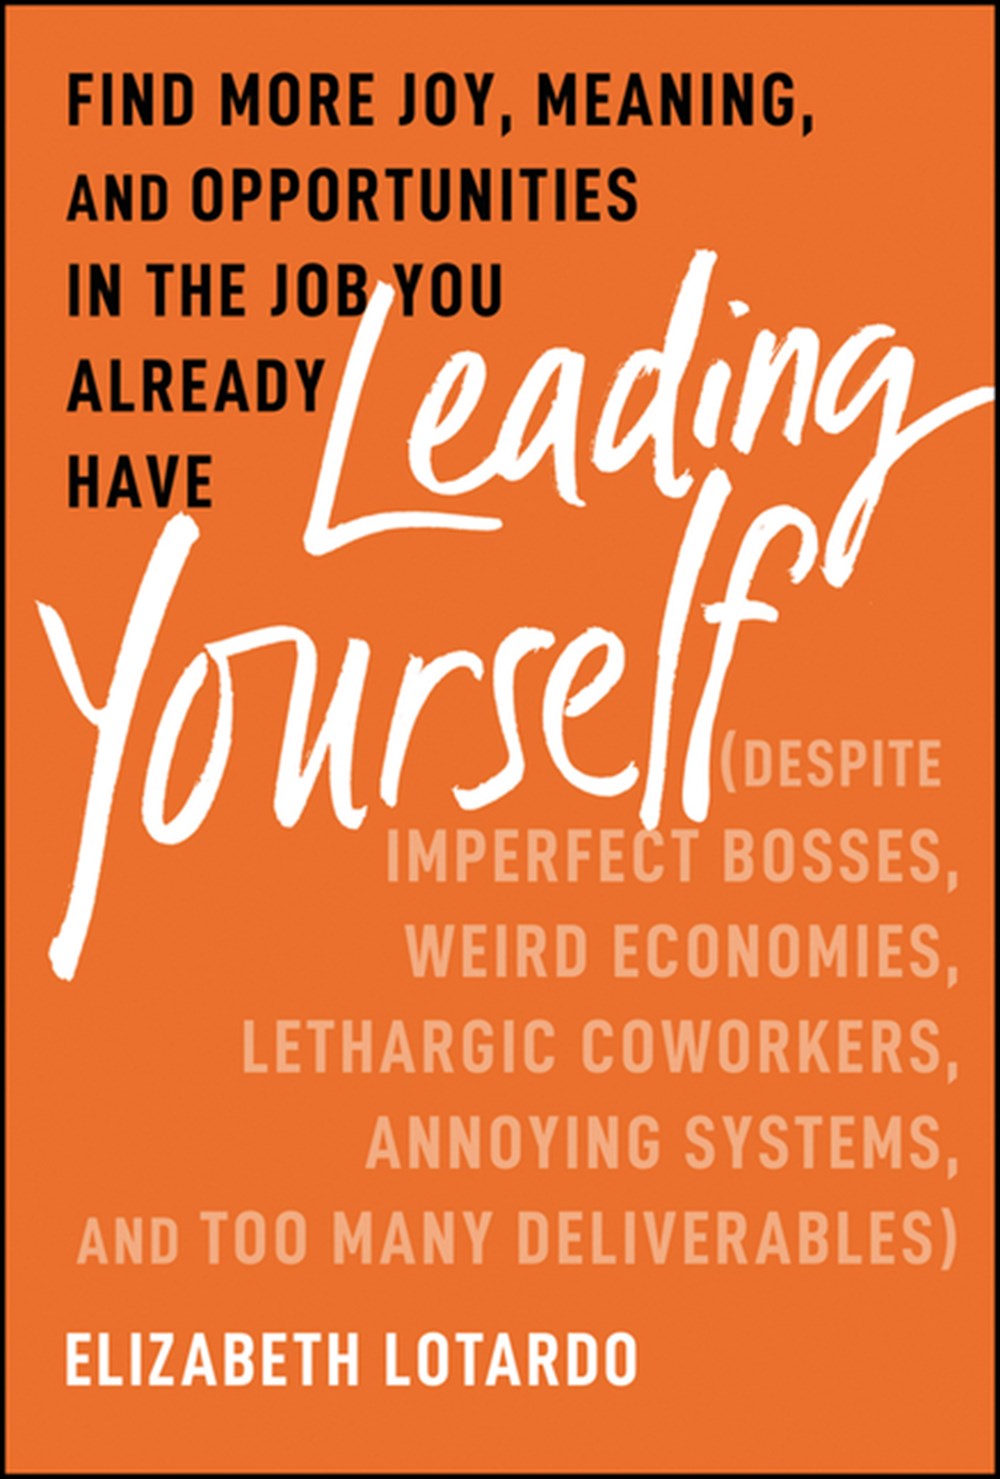 Leading Yourself: Find More Joy, Meaning, and Opportunities in the Job You Already Have (Despite Imp